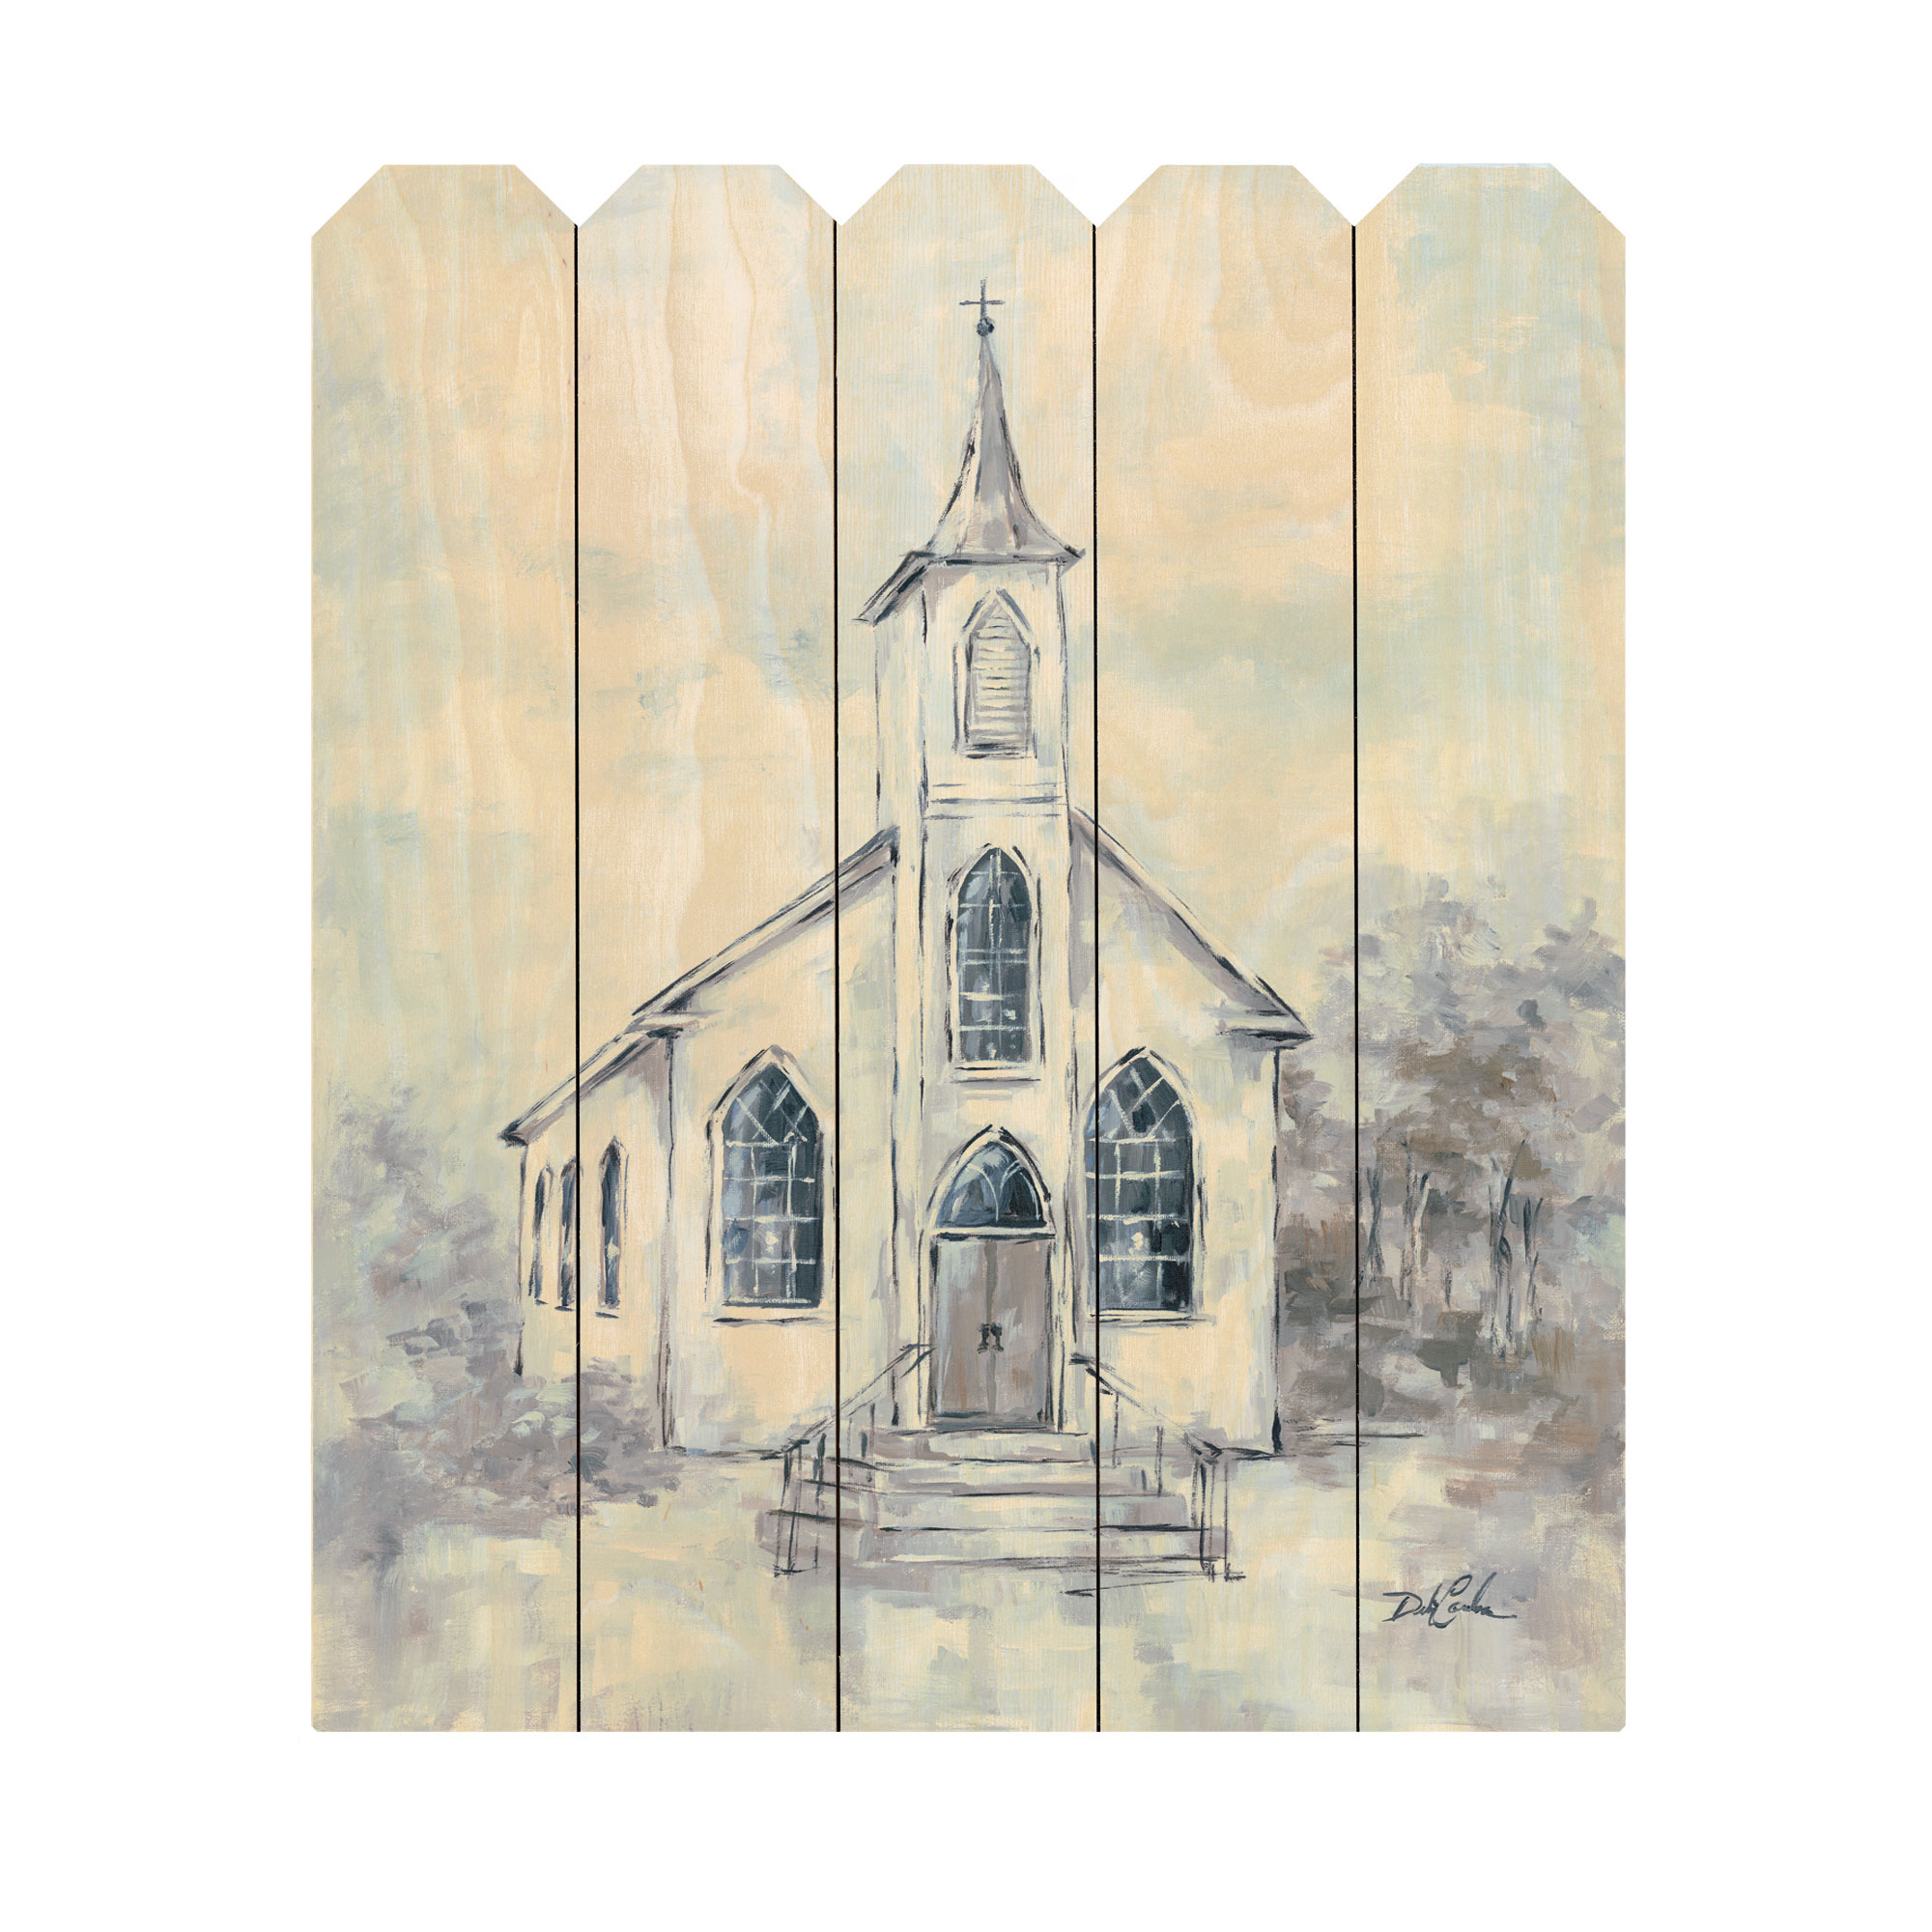 "Faith" By Artisan Debi Coules, Printed on Wooden Picket Fence Wall Art